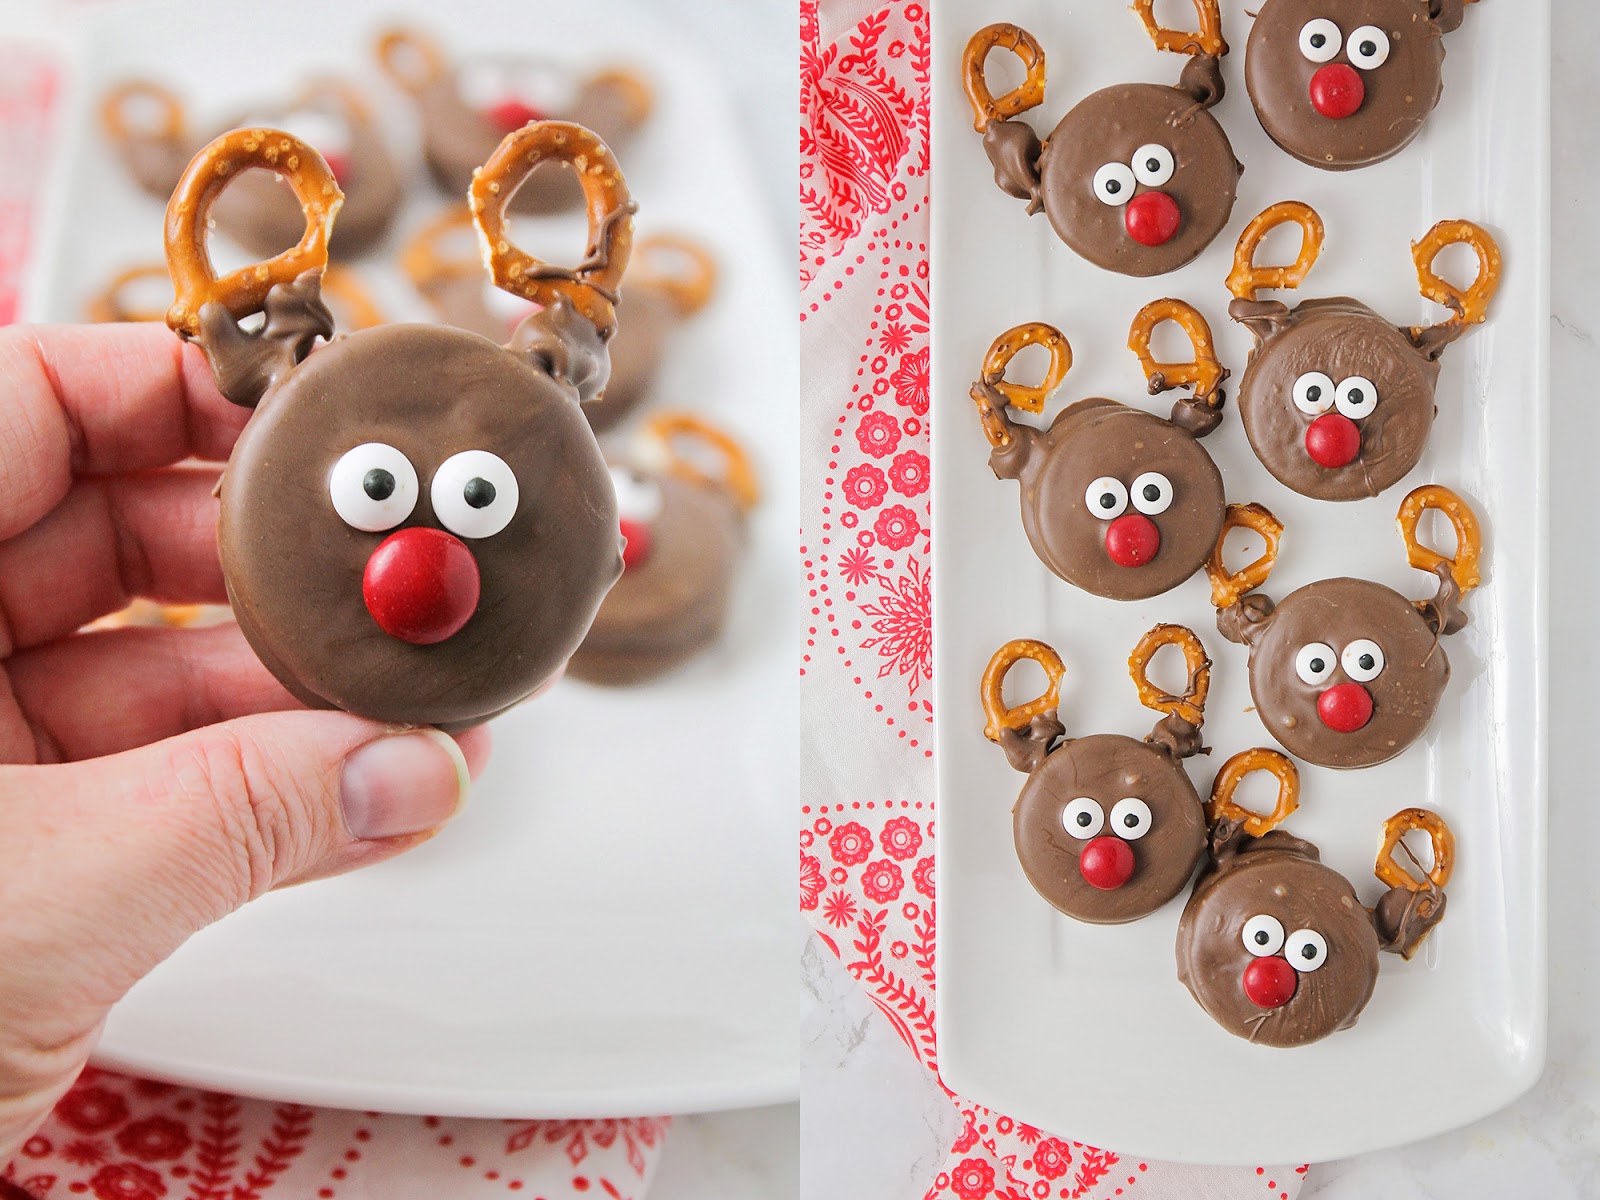 These Christmas Oreos are so festive and adorable, and perfect for gifting!